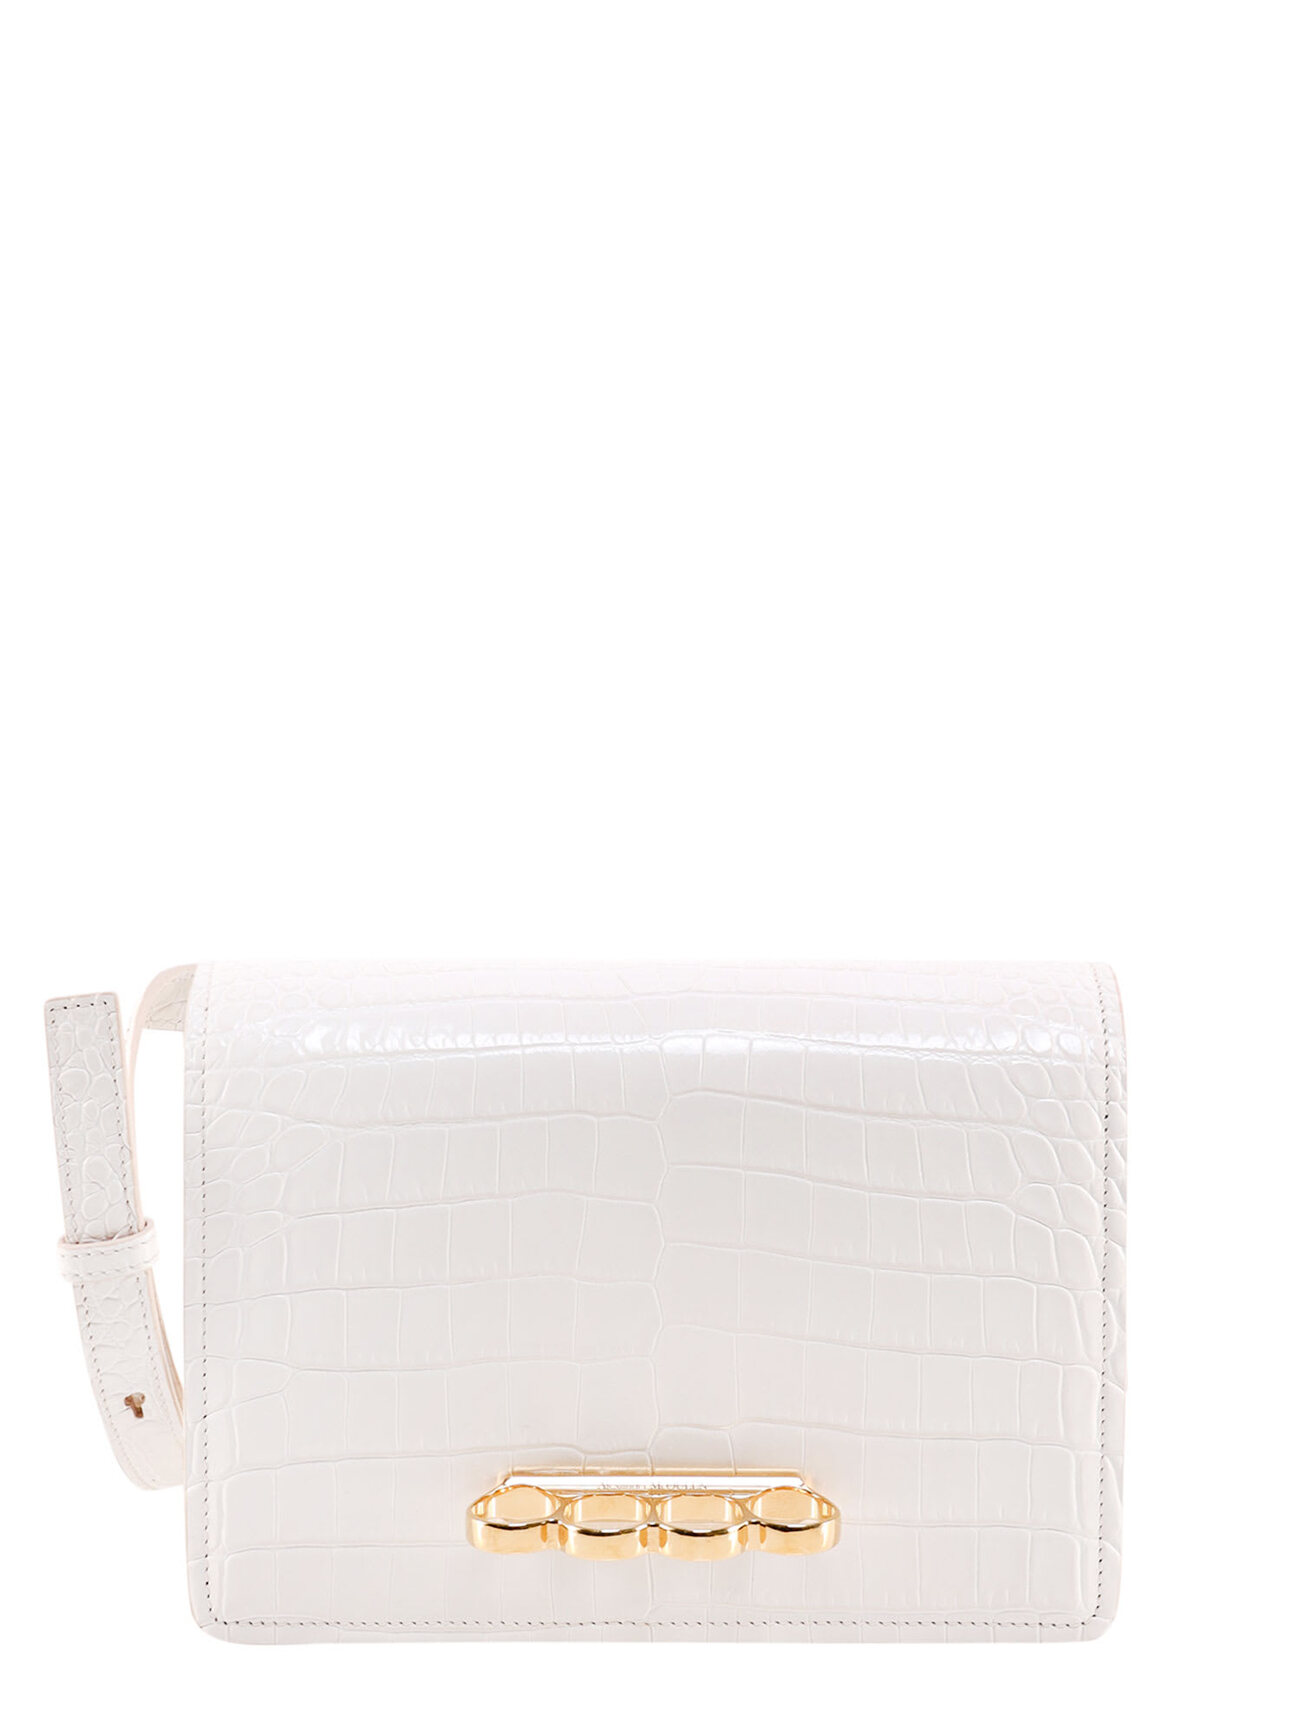 Alexander McQueen The Four Ring Shoulde Bag in white